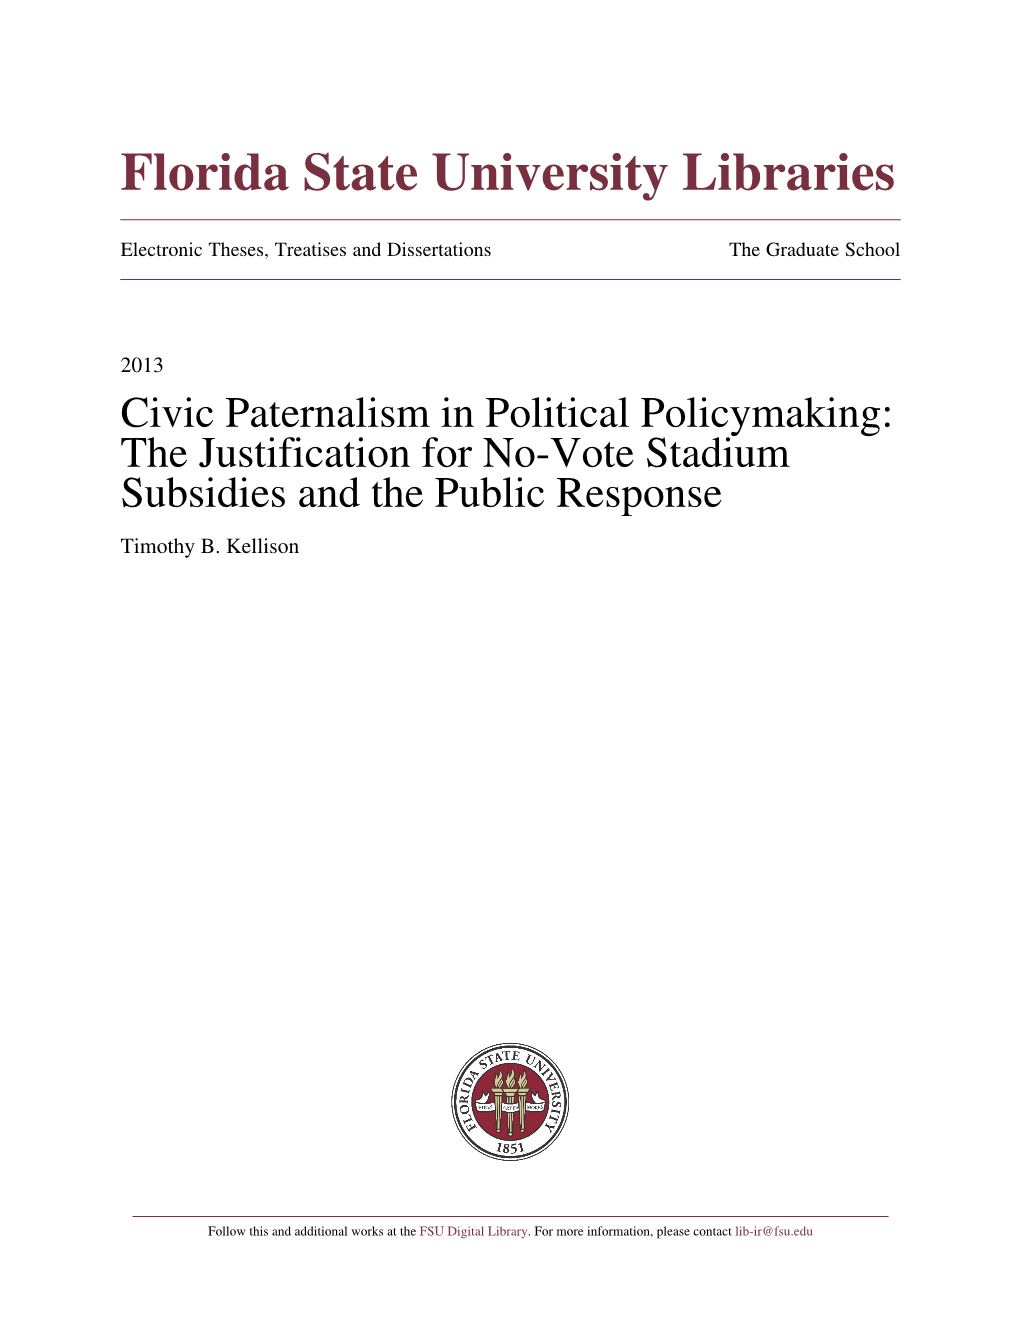 Civic Paternalism in Political Policymaking: the Justification for No-Vote Stadium Subsidies and the Public Response Timothy B